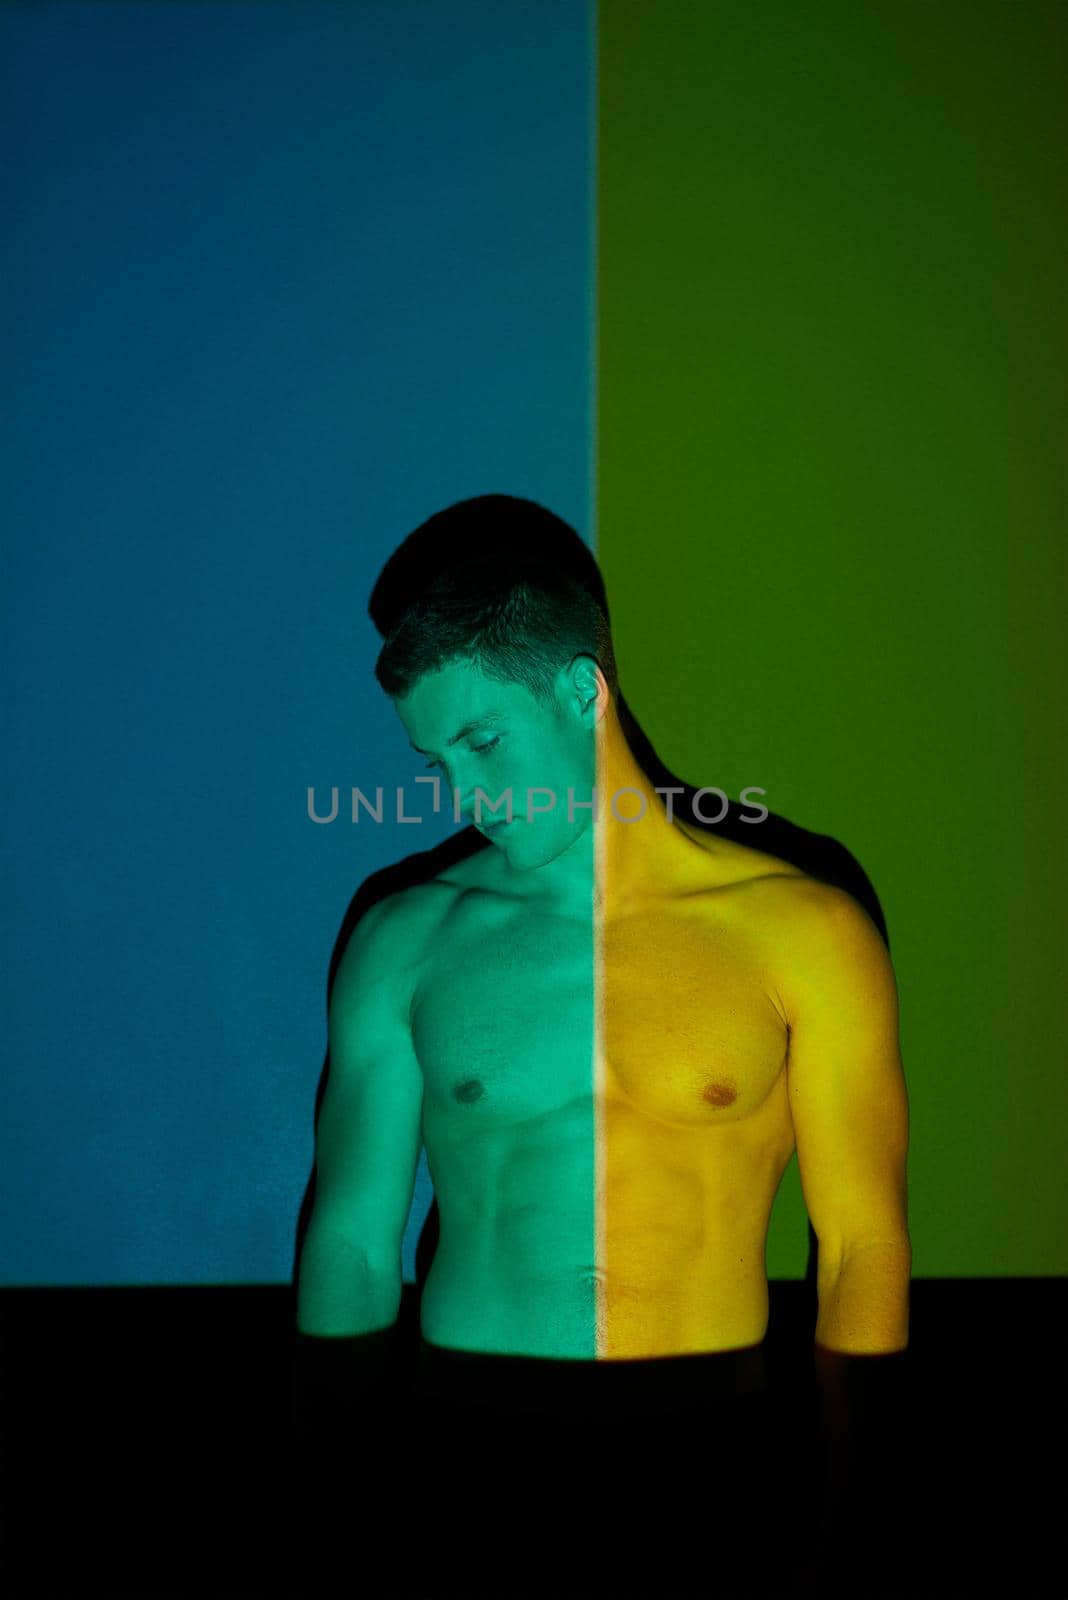 Studio shot of a young man posing against abstract lighting.